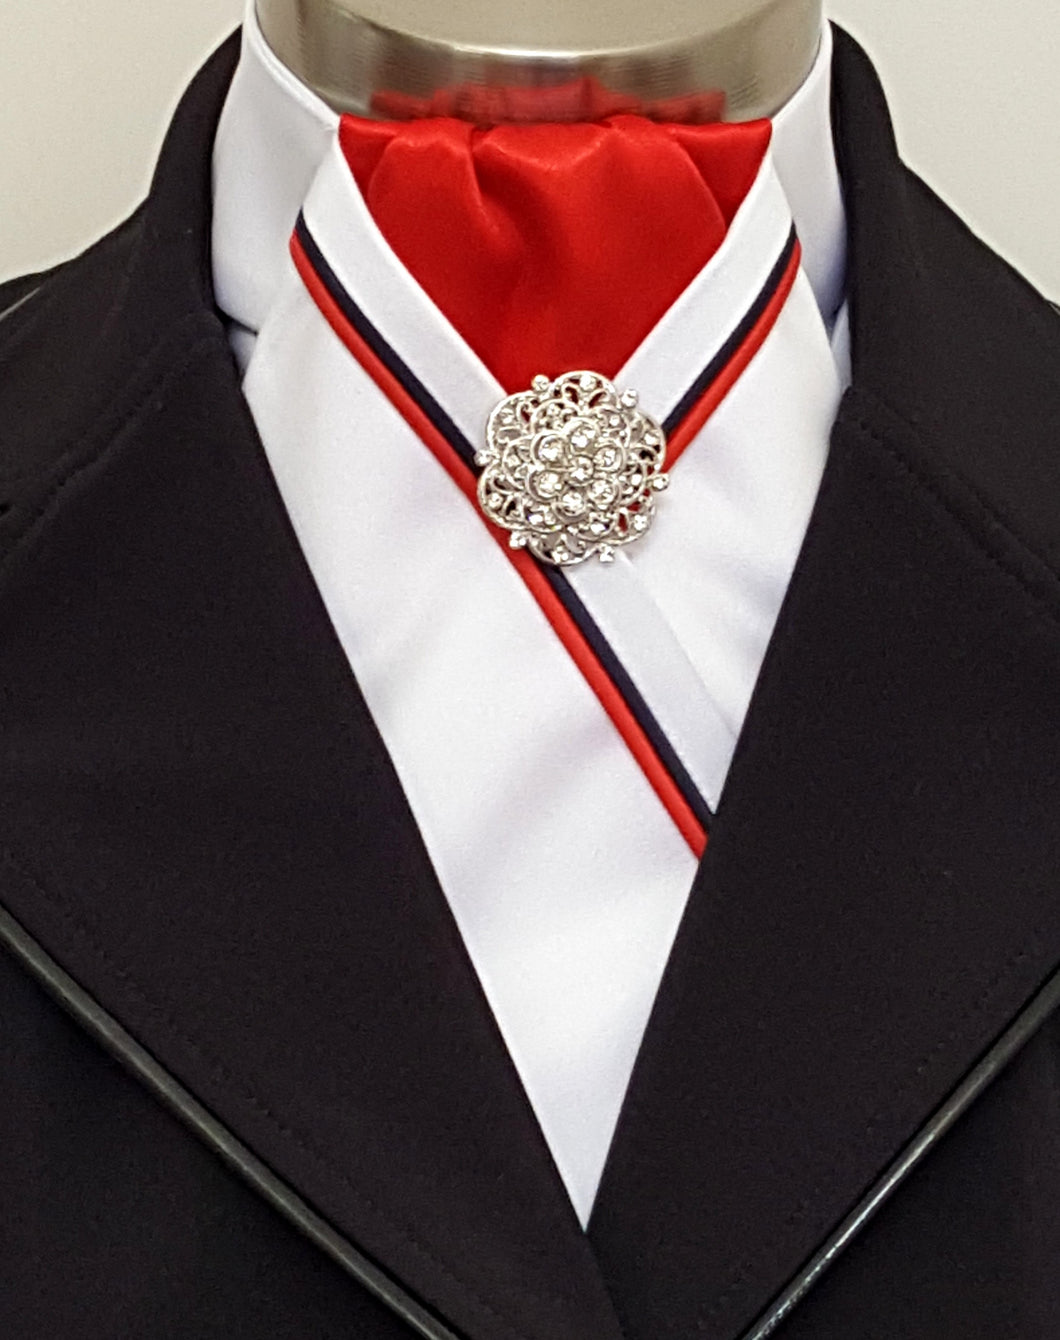 ERA RACHAEL STOCK TIE - White satin, red, black & red piping & brooch